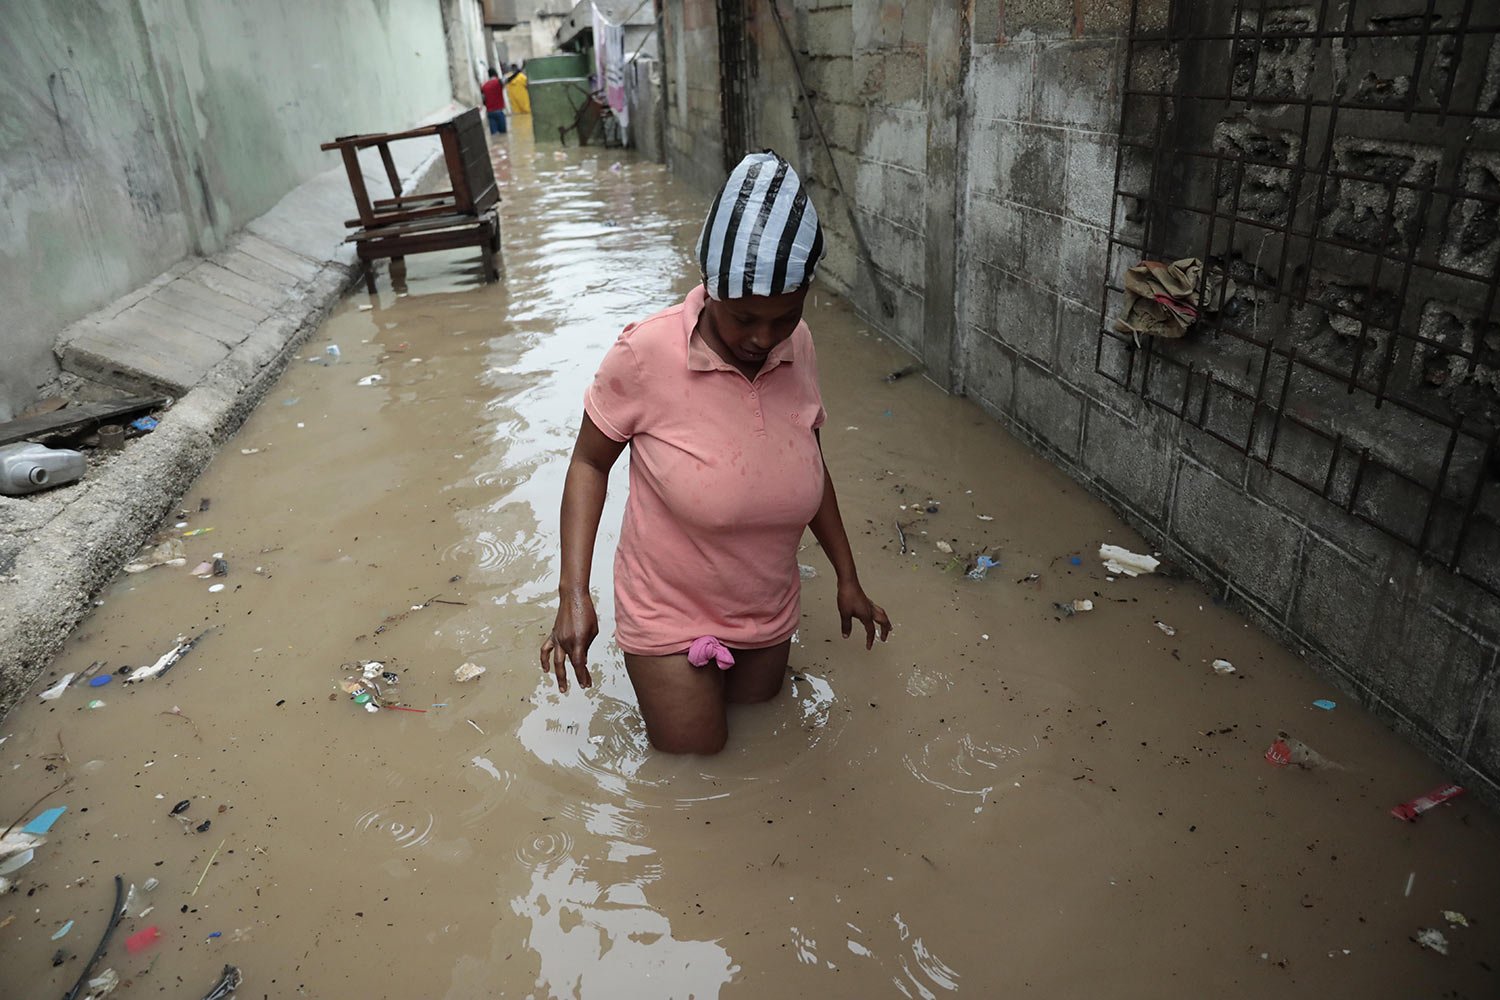  A woman wades through a flooded alleyway after a heavy rain in Port-au-Prince, Haiti, June 3, 2023. (AP Photo/Odelyn Joseph) 